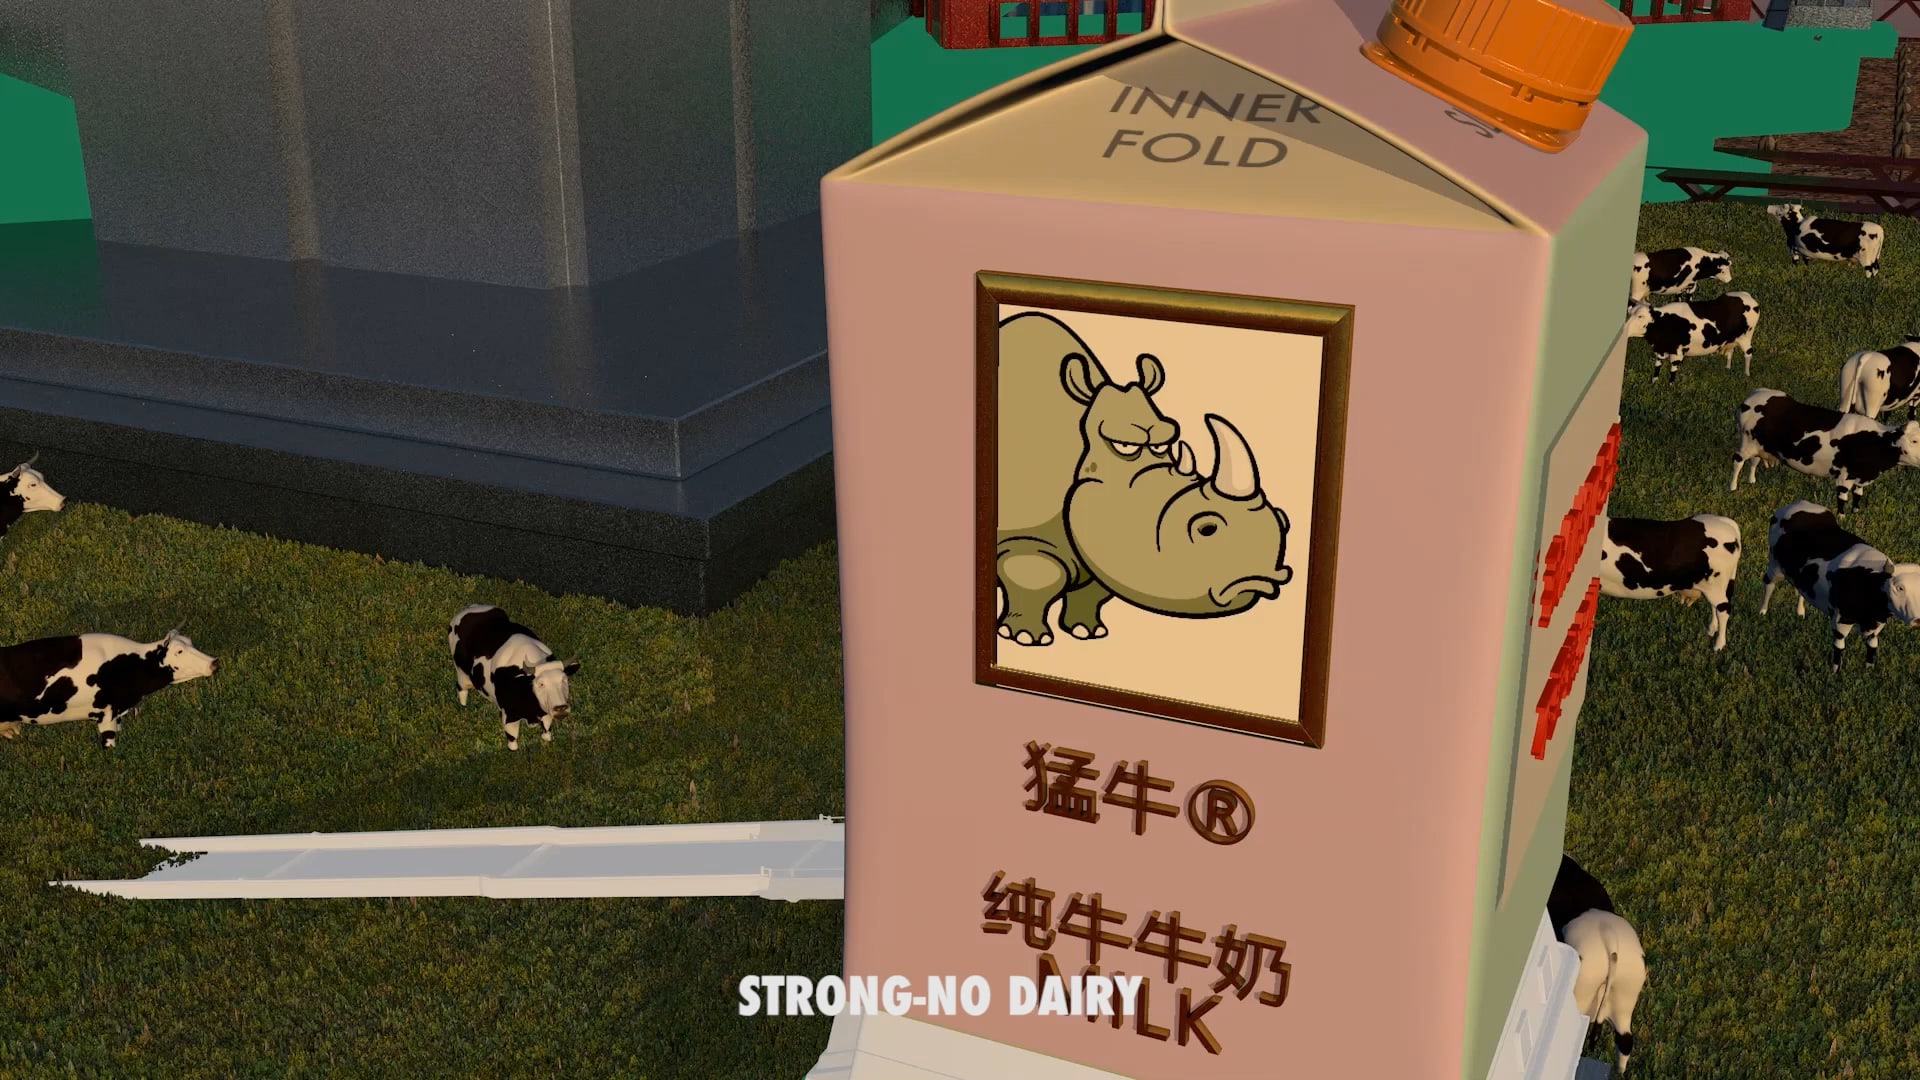 Strong-No Dairy